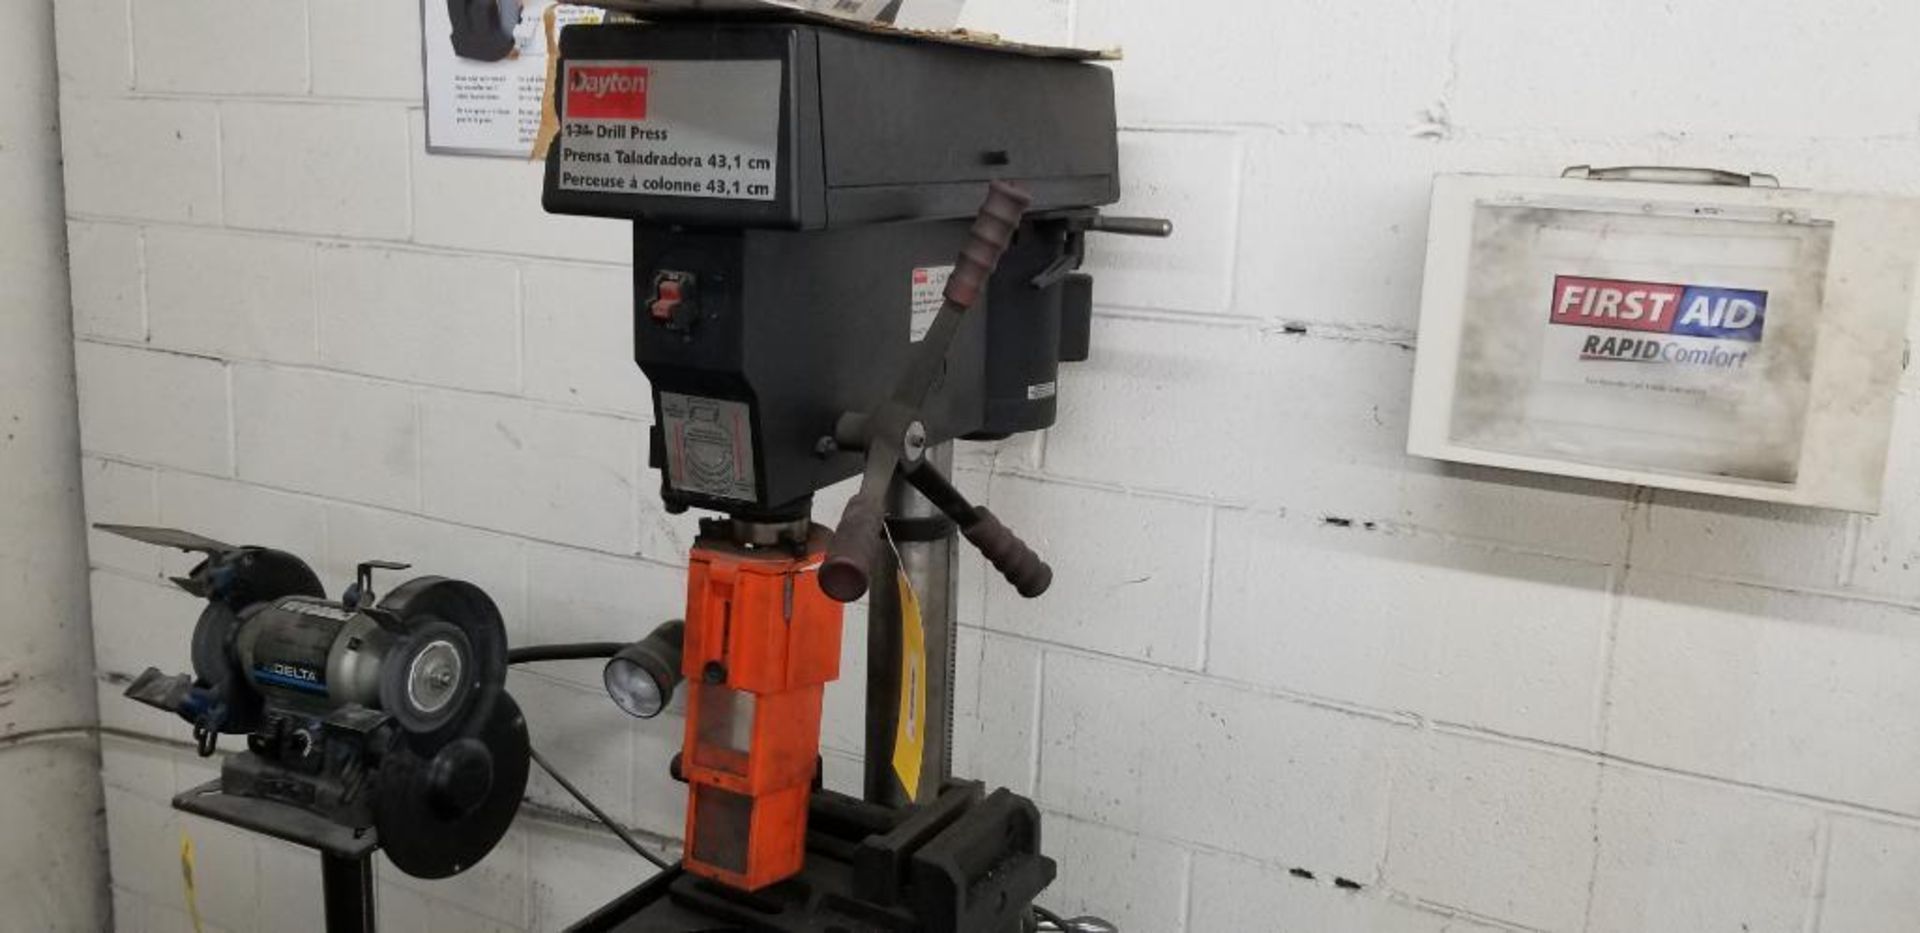 Dayton 17" Drill Press, Model 3Z918F, 120v ($25 Loading Fee Will be Added to Buyers Invoice) - Image 2 of 3